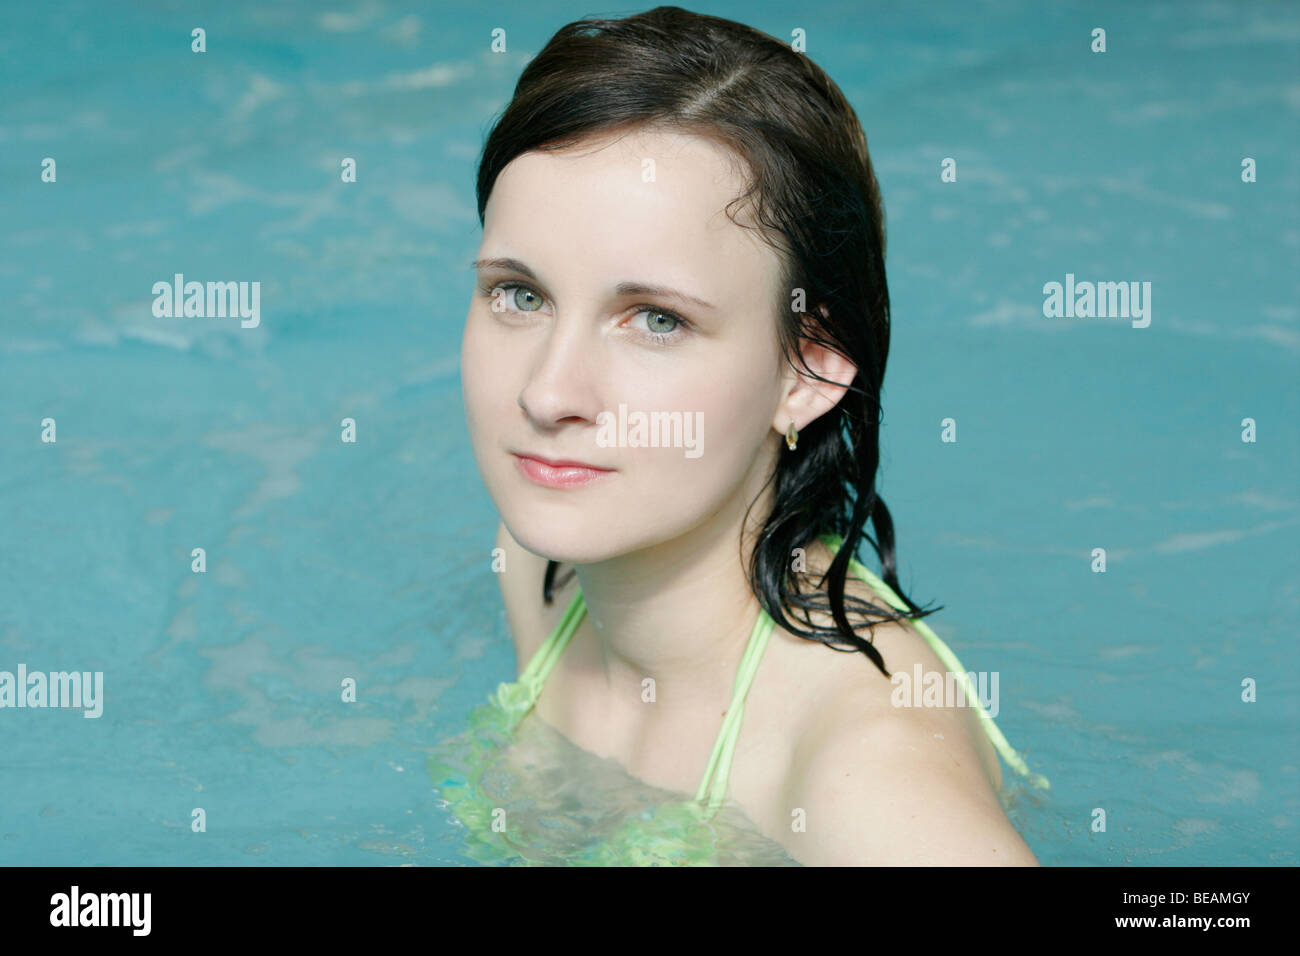 Young woman in swimming pool. Portrait. Stock Photo